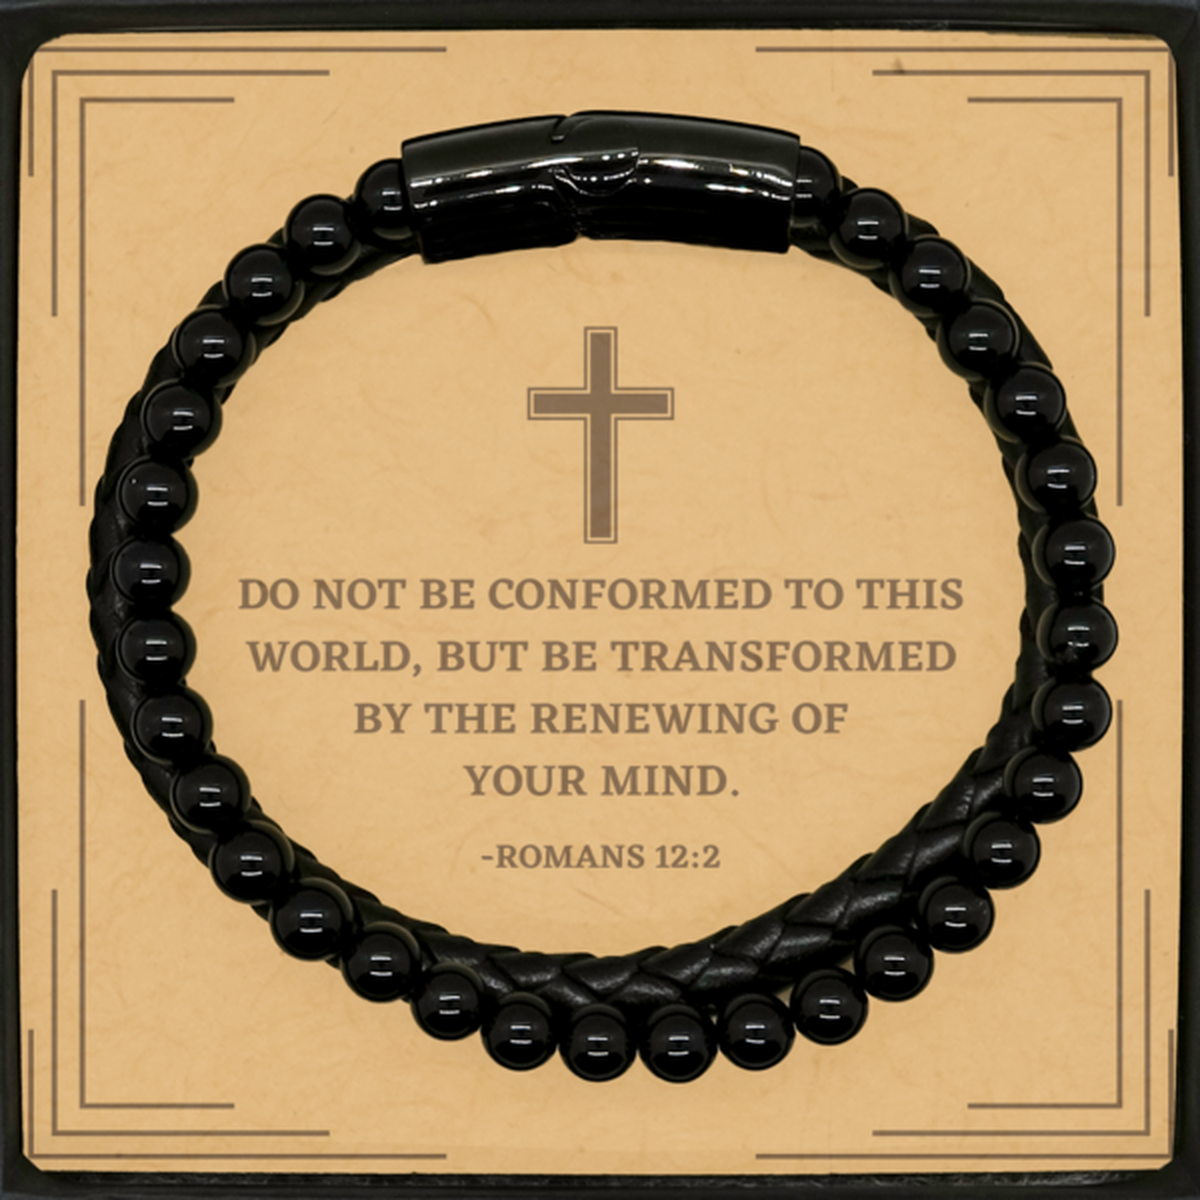 Baptism Gifts For Teenage Boys Girls, Christian Bible Verse Stone Leather Bracelet, Do not be conformed to this world, Confirmation Gifts, Bible Verse Card for Son, Godson, Grandson